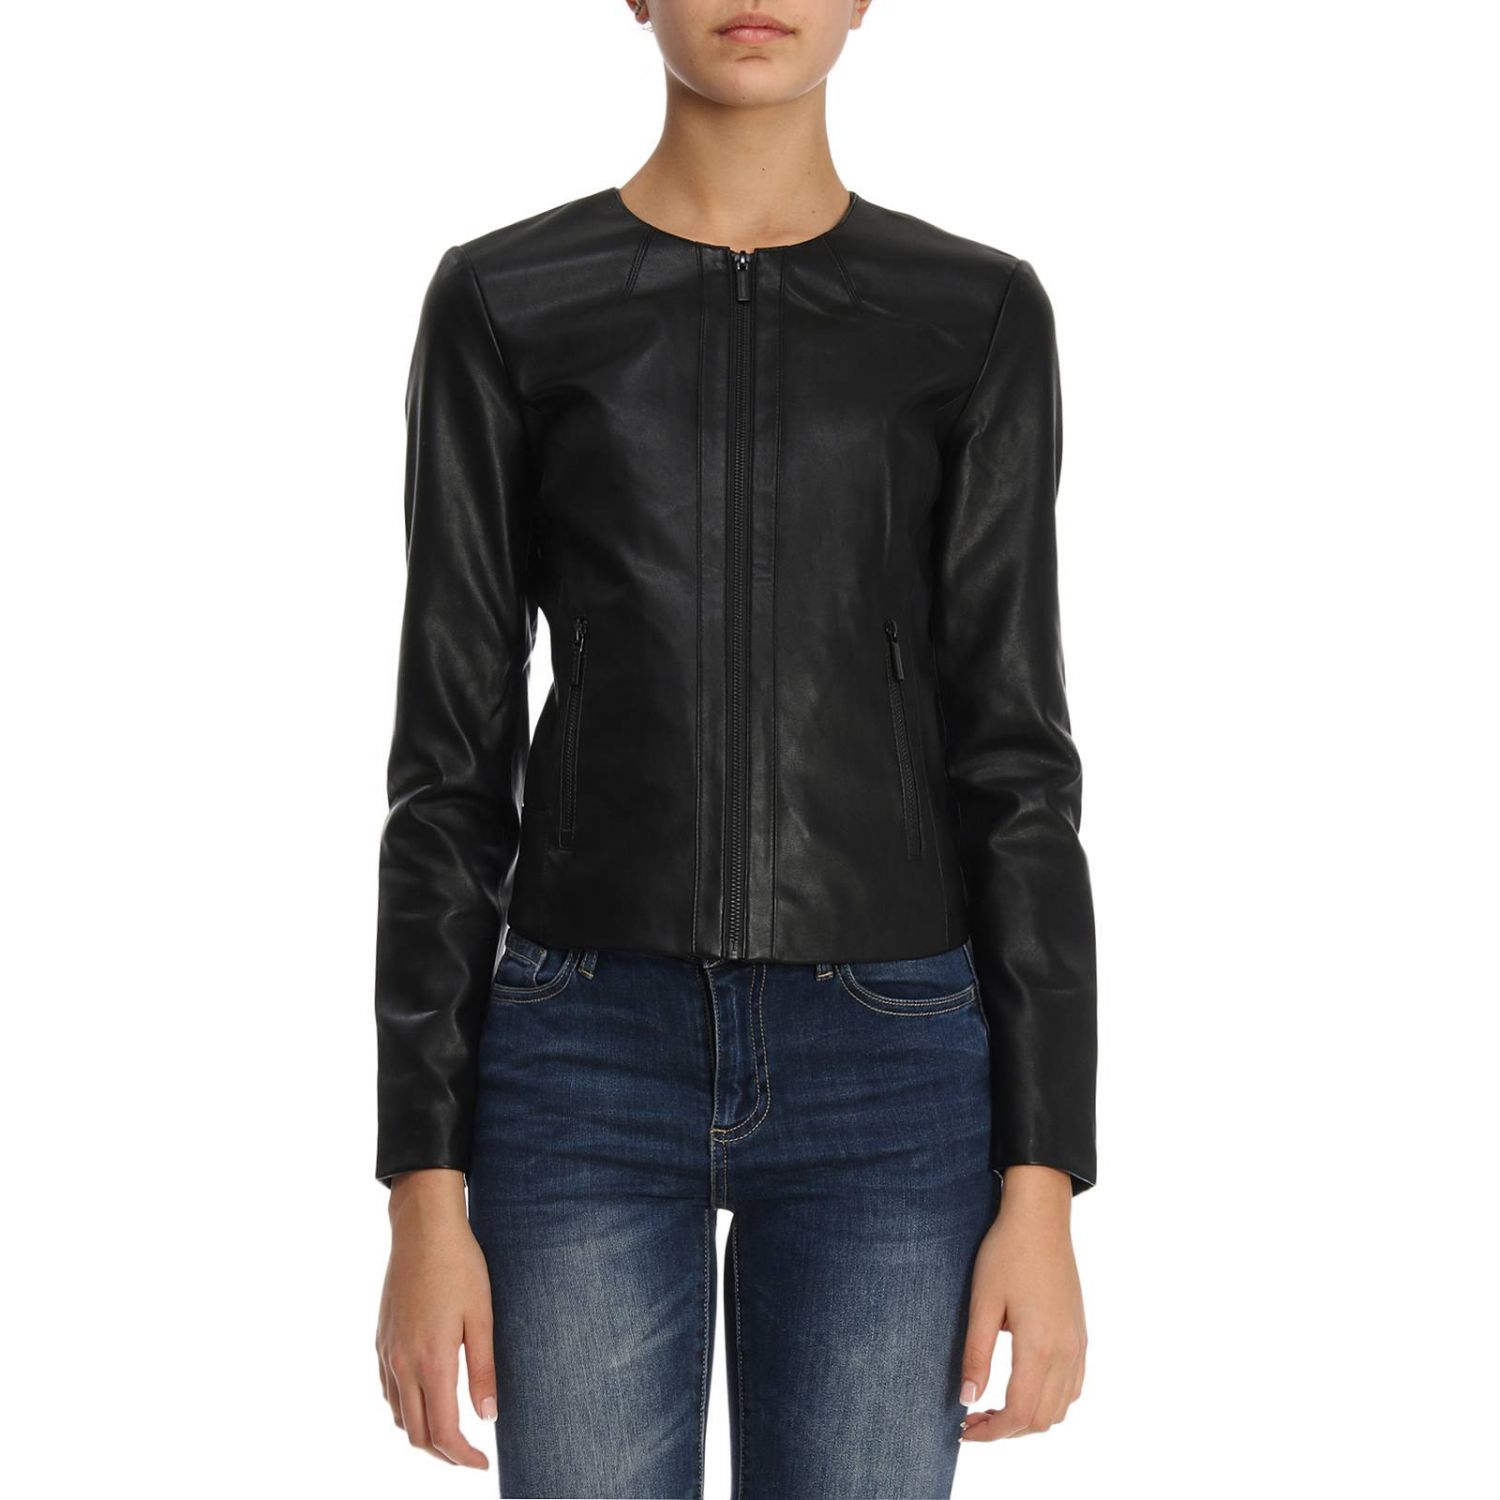 armani exchange jackets for womens